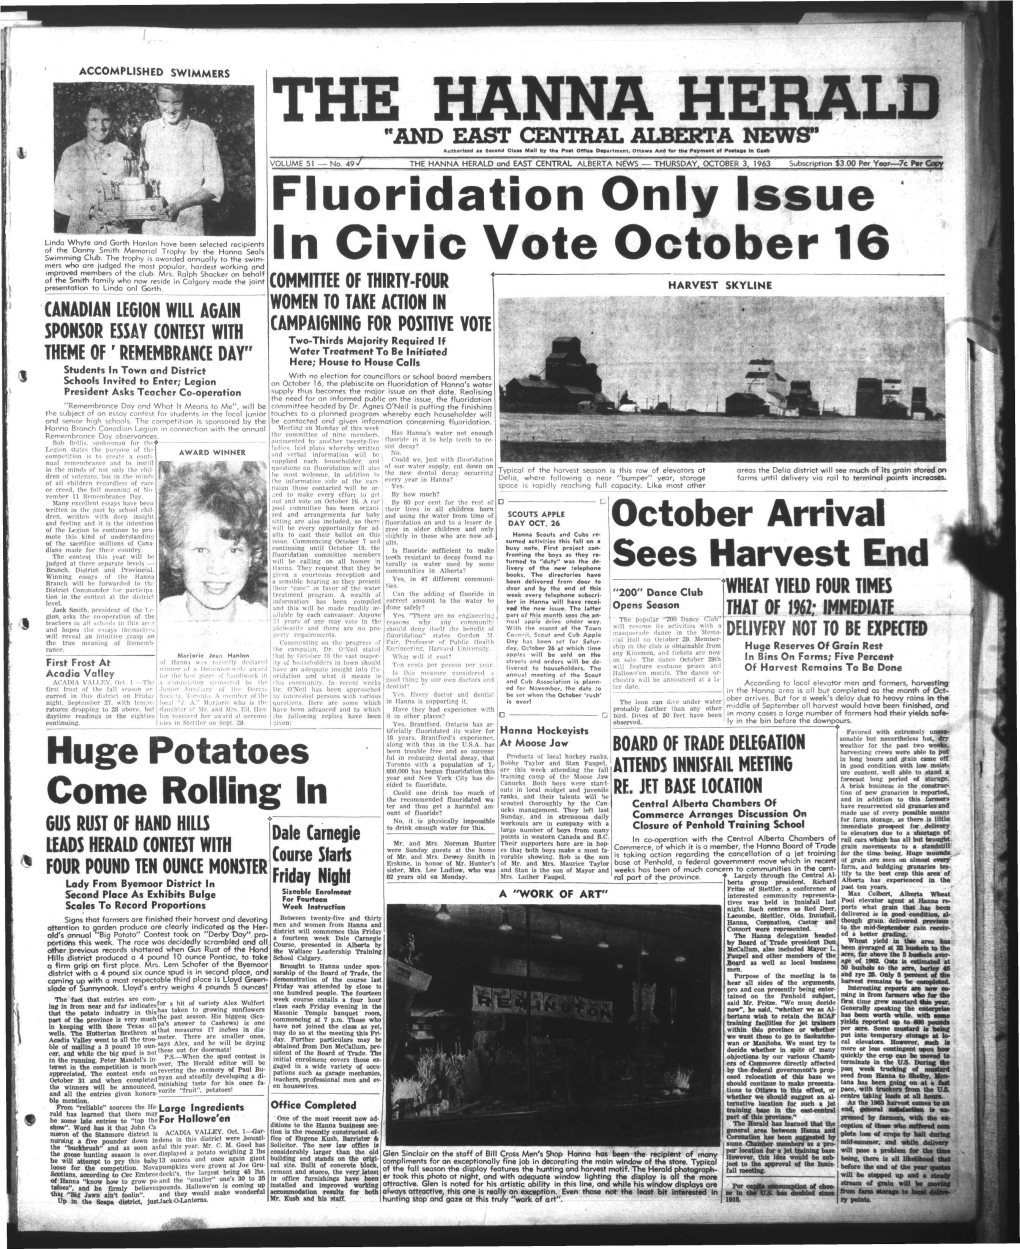 Fluoridation Only Issue in Civic Vote October 16